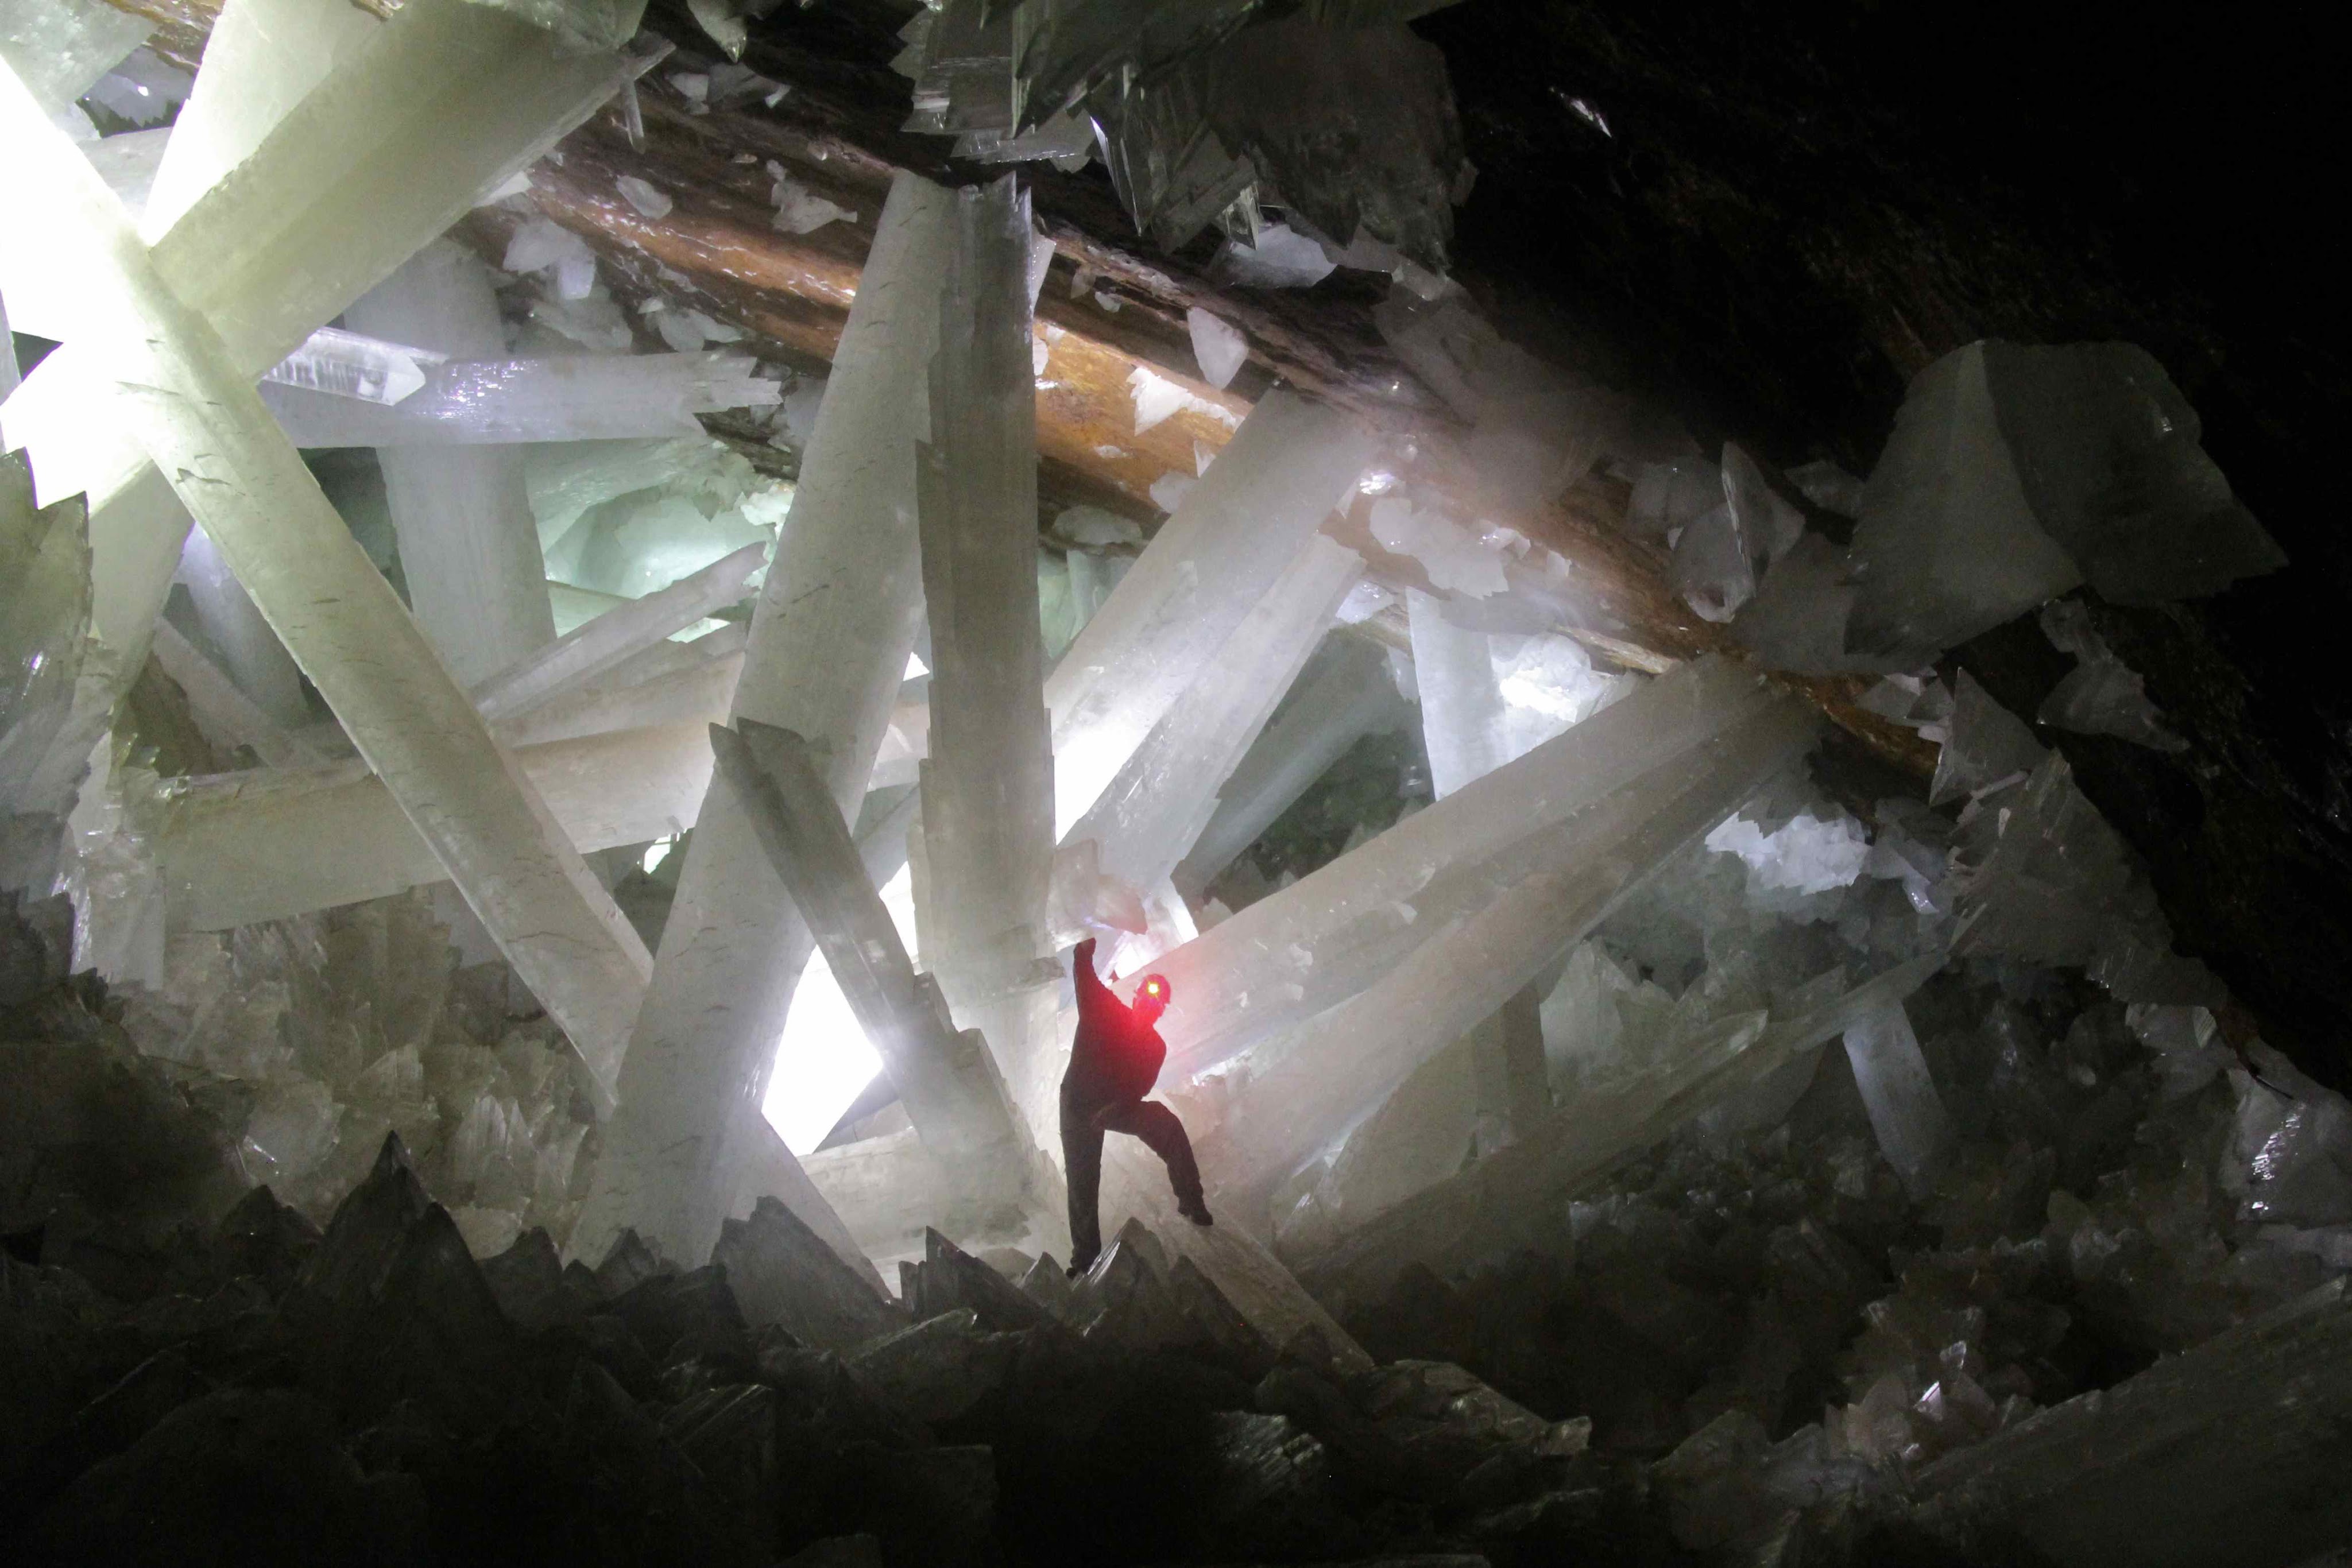 Found in Chihuahua, Mexico, the Cave of Crystals is definitely a sight to behold. It has some of the largest natural crystals in the world housed in its main chamber. Unfortunately, due to the hot magma underneath the cave, it’s mostly too hot and humid to explore fully.